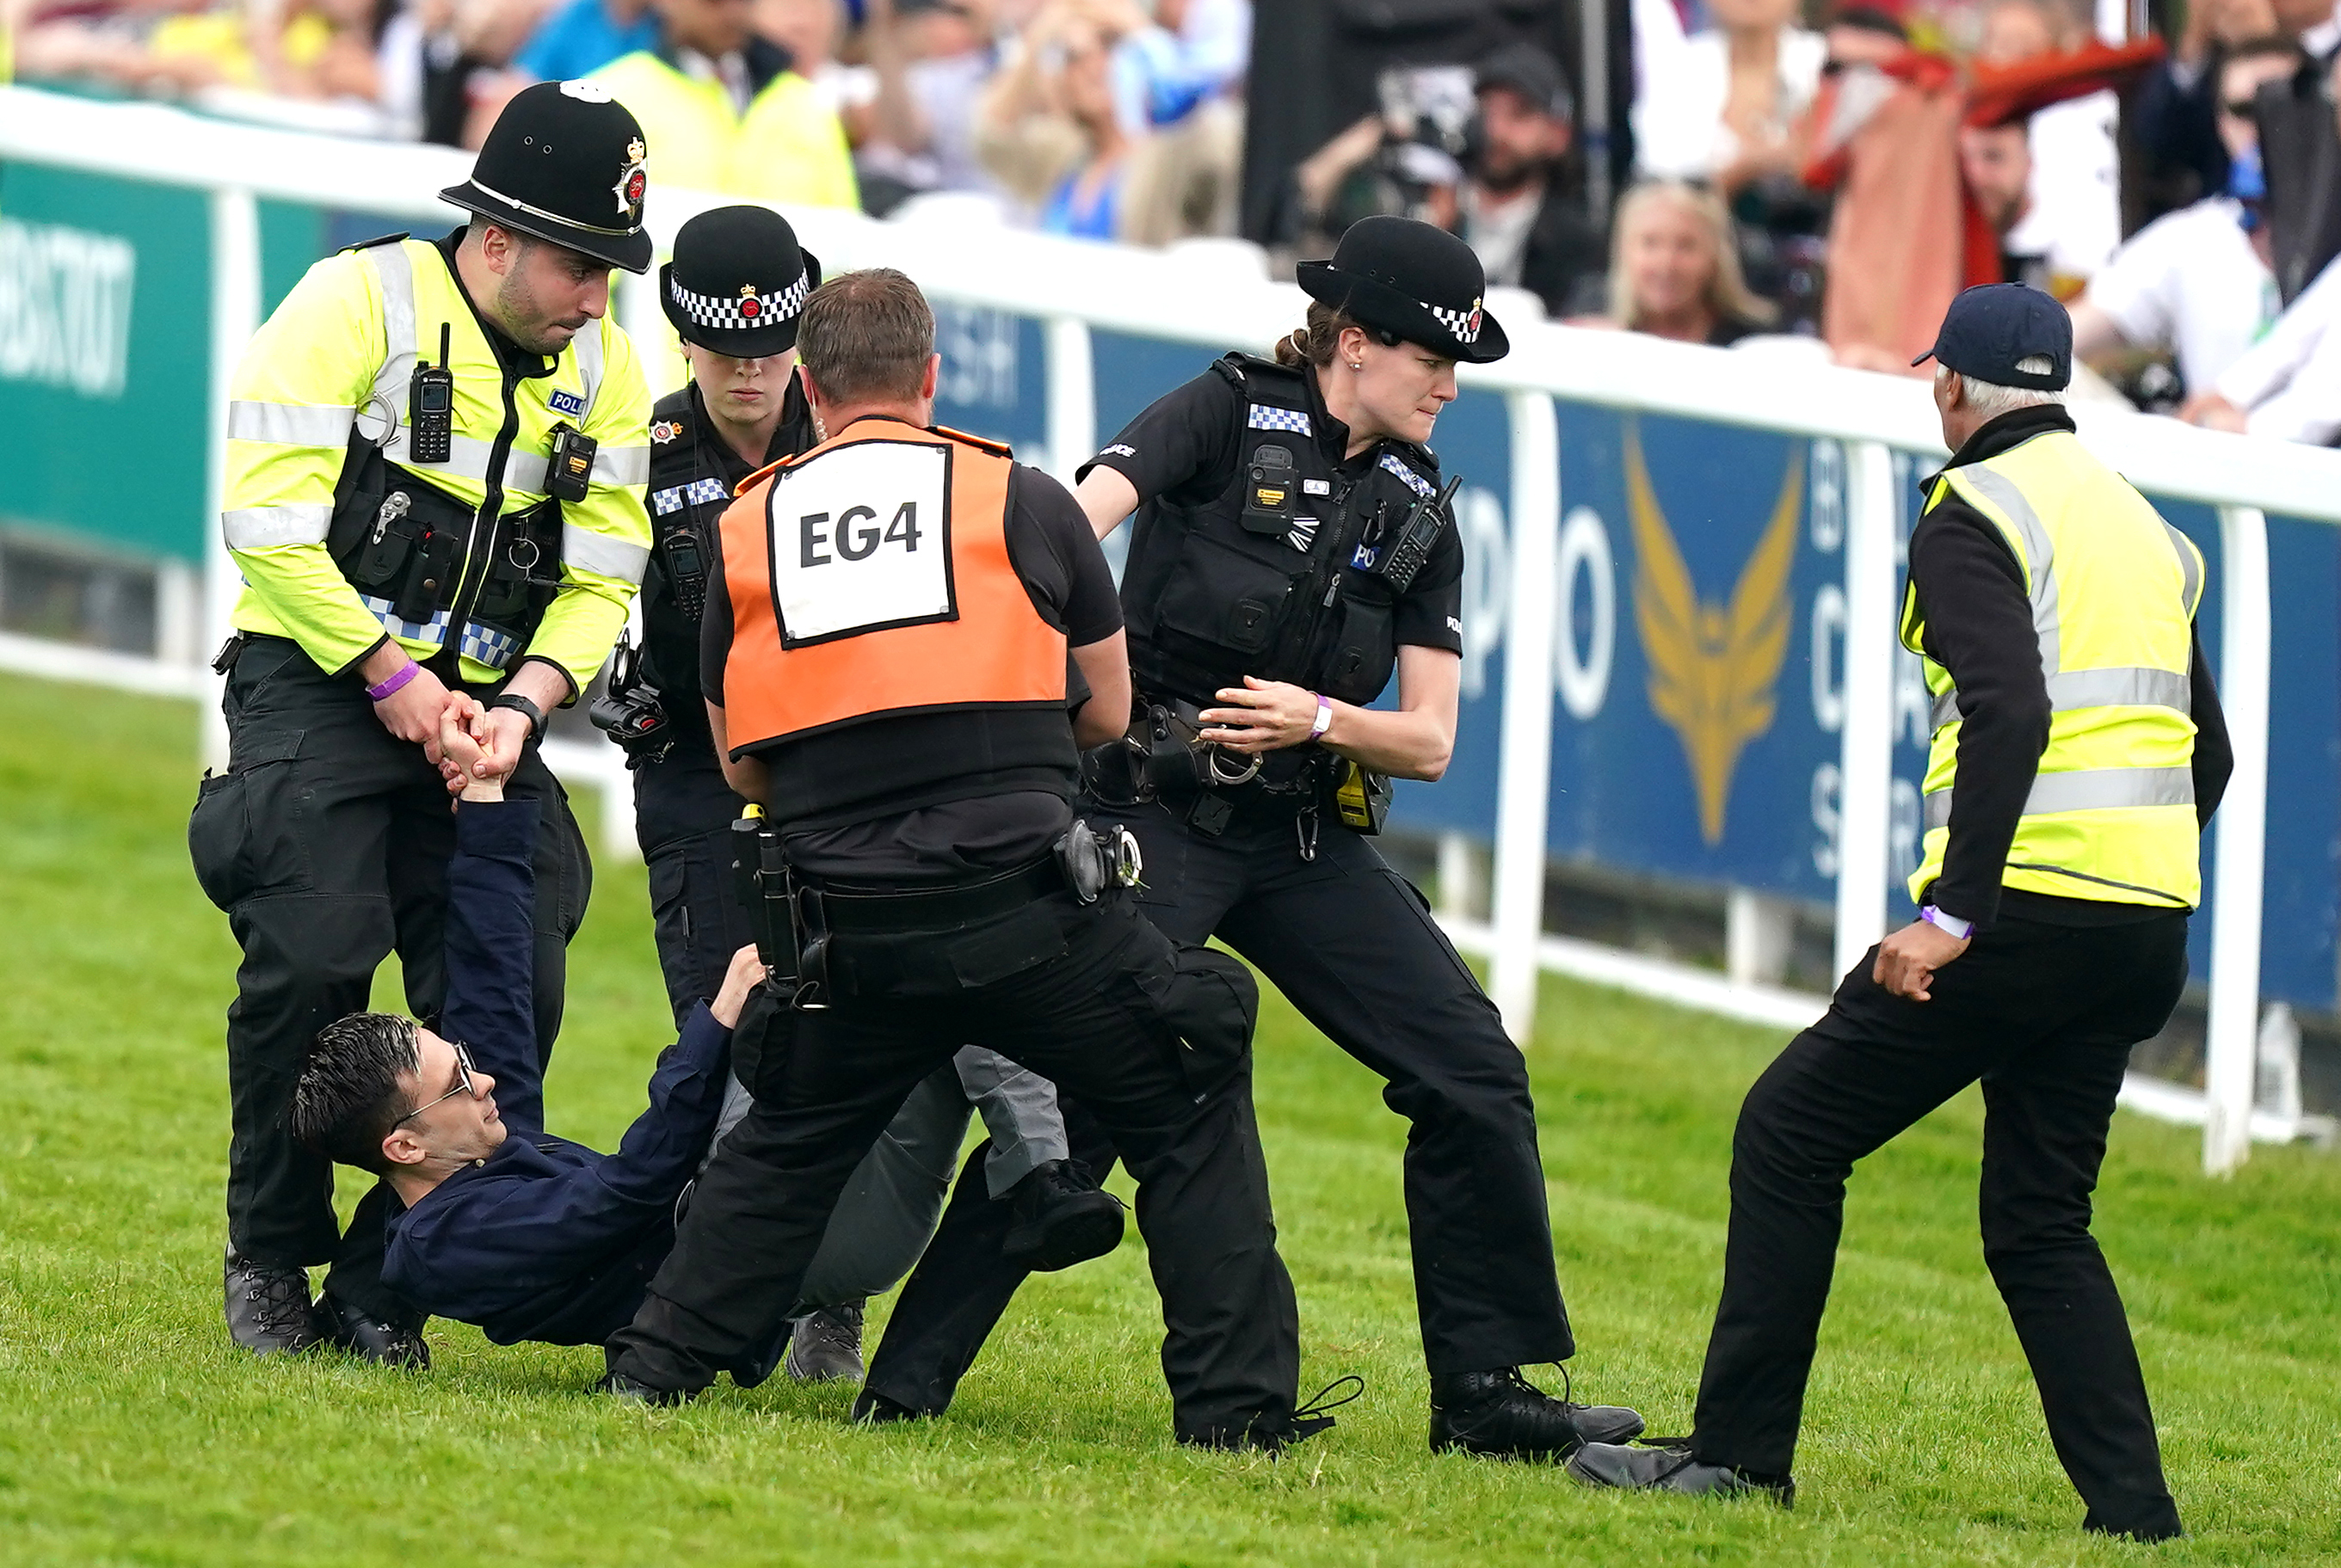 A protester is arrested at Epsom